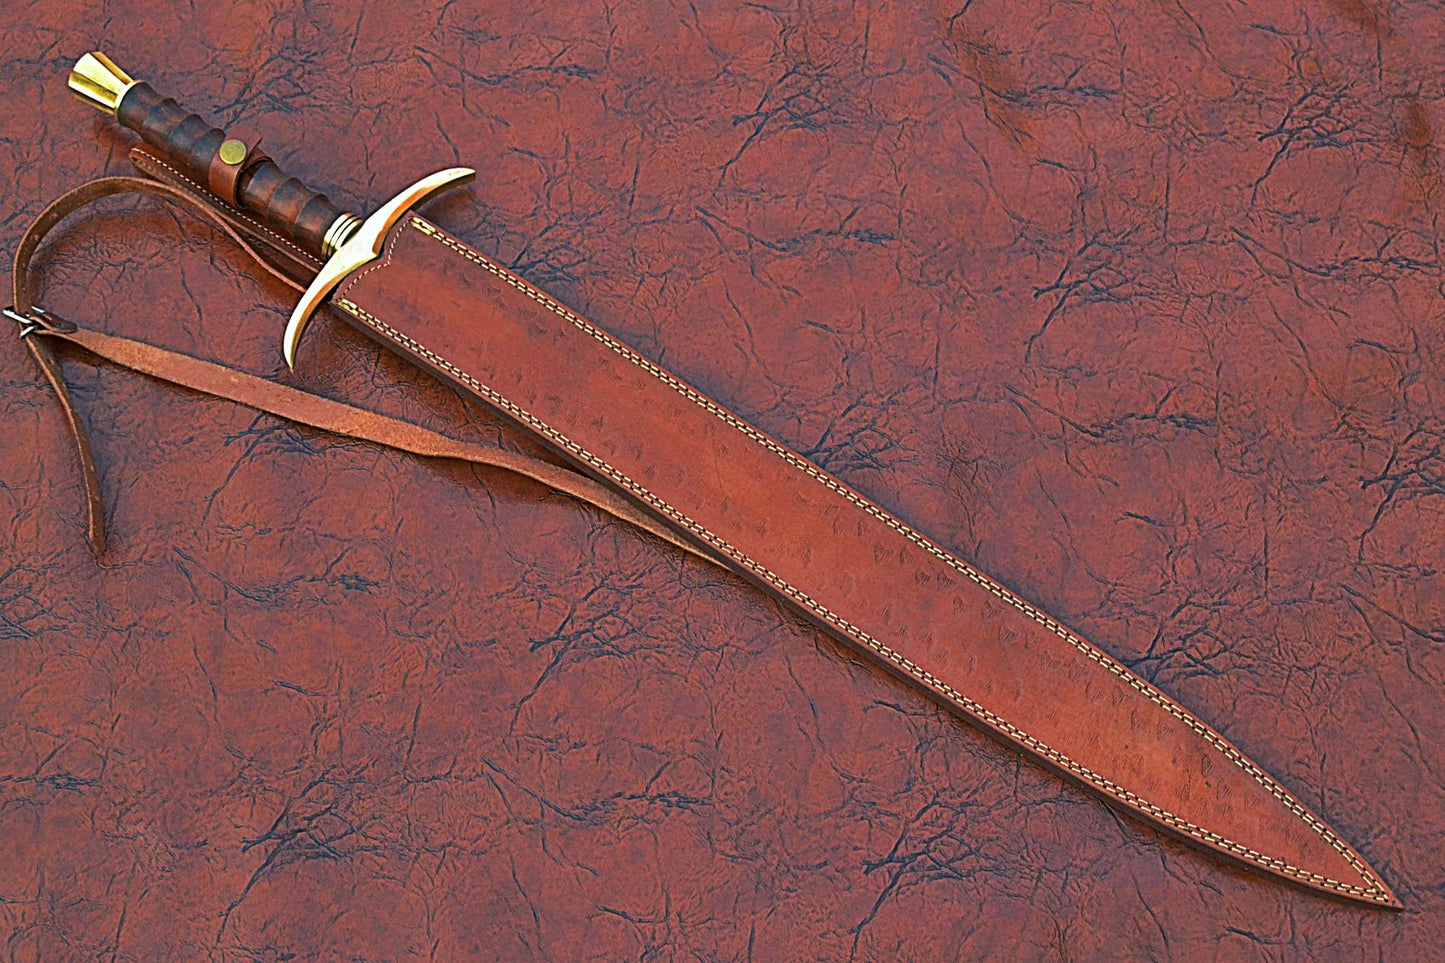 32 inches Long Sting Sword, 22" Long Hand Forged Damascus Steel Double Edge Blade, Brass Cross hilt Forward and Pommel, Walnut Wood Serrated Grip, Leather Scabbard with Shoulder Stripe